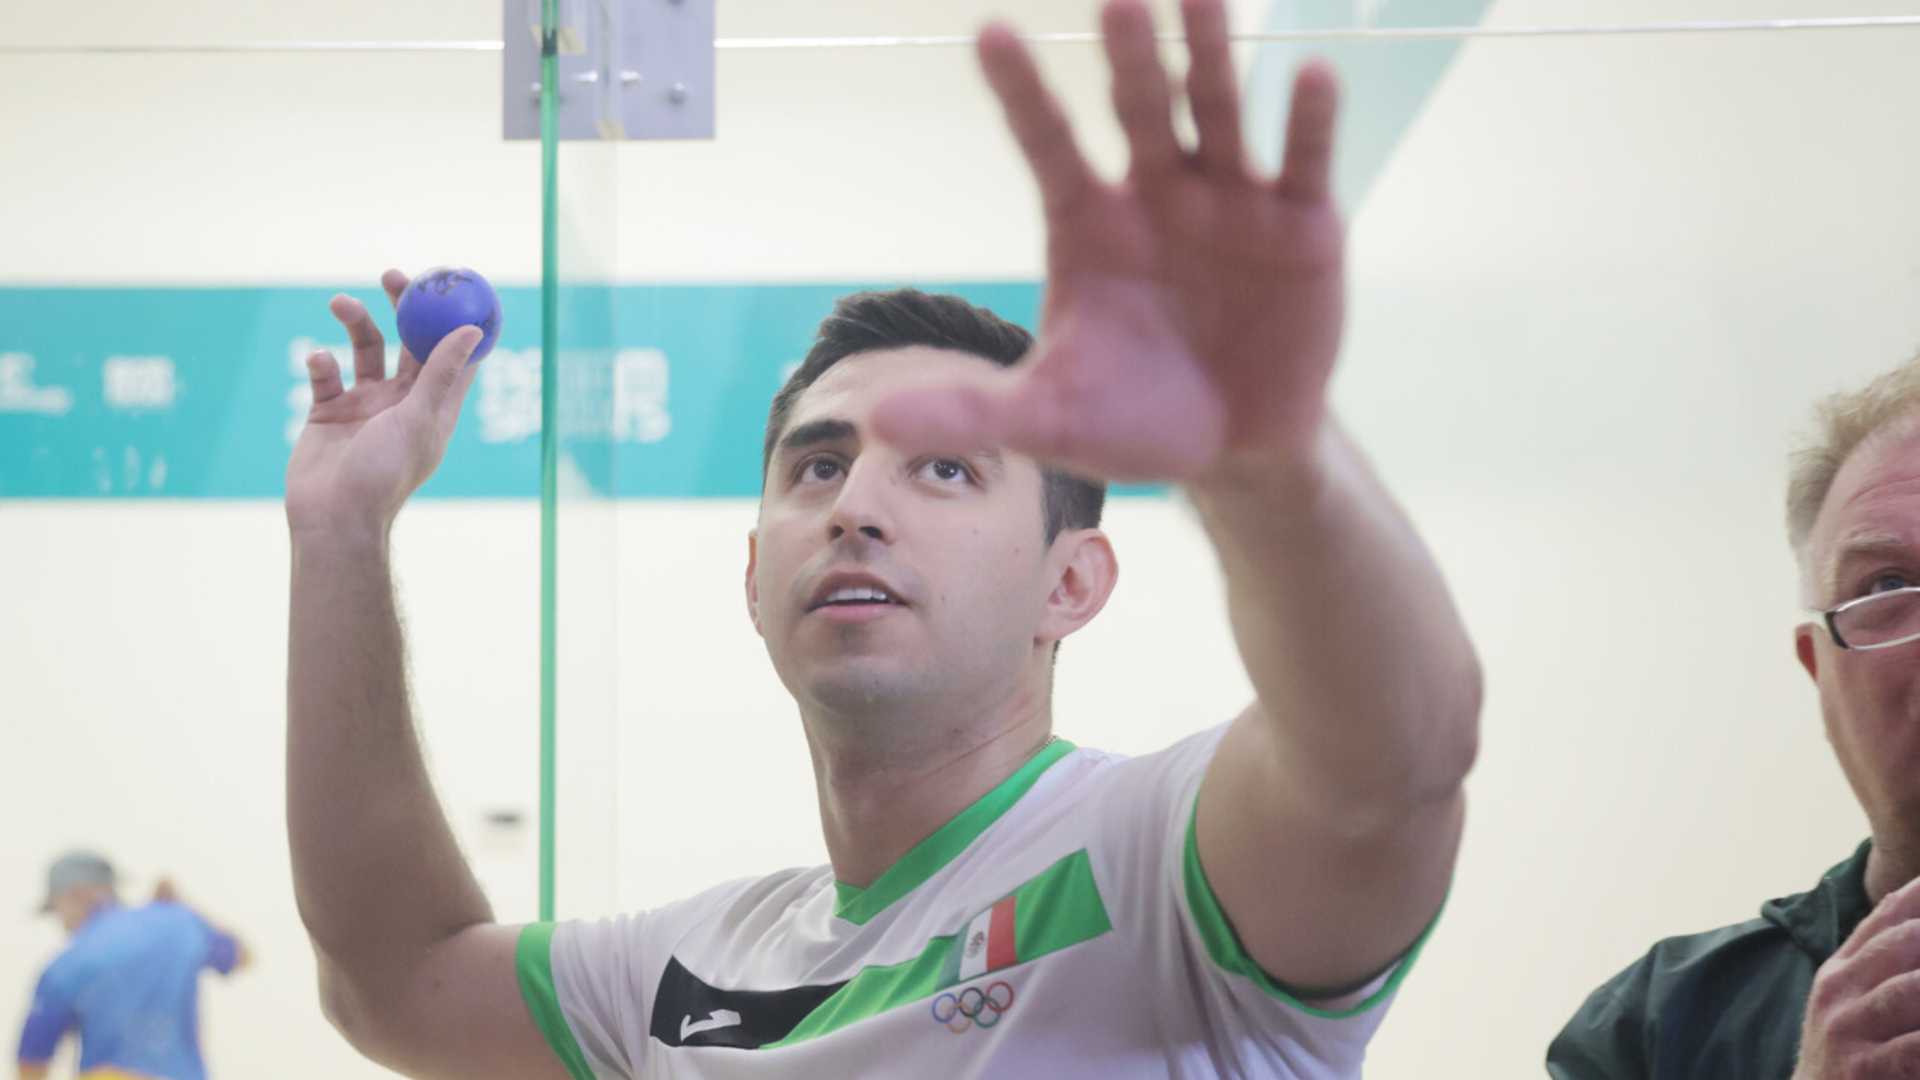 Dream Final? Mexico and Bolivia Advance to Team Semifinals in Racquetball